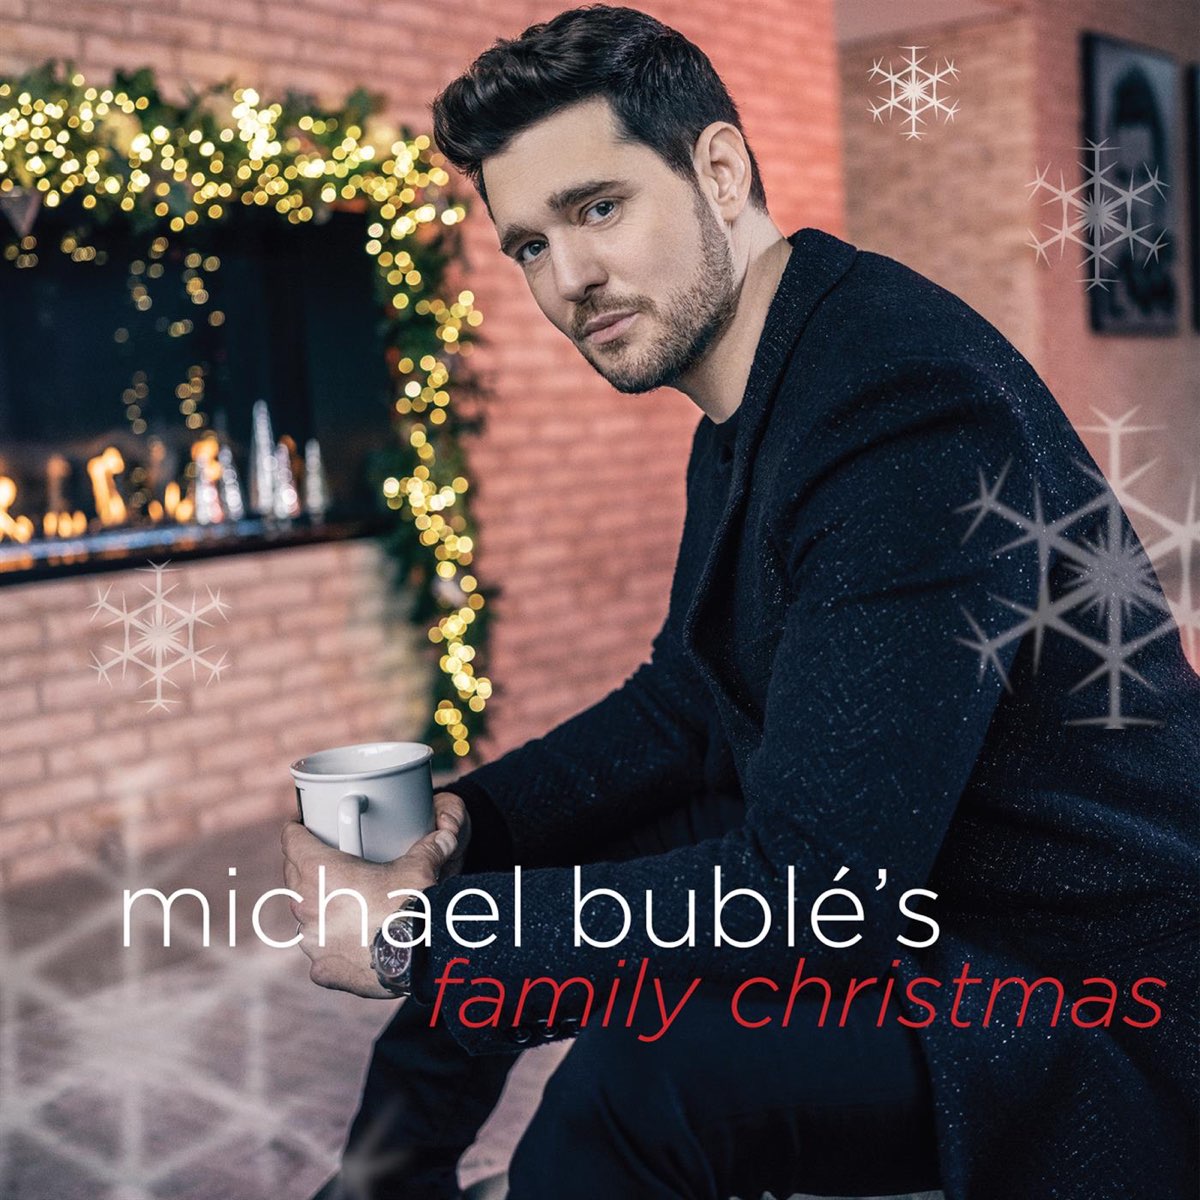 ‎Michael Bublé's Family Christmas EP by Michael Bublé on Apple Music